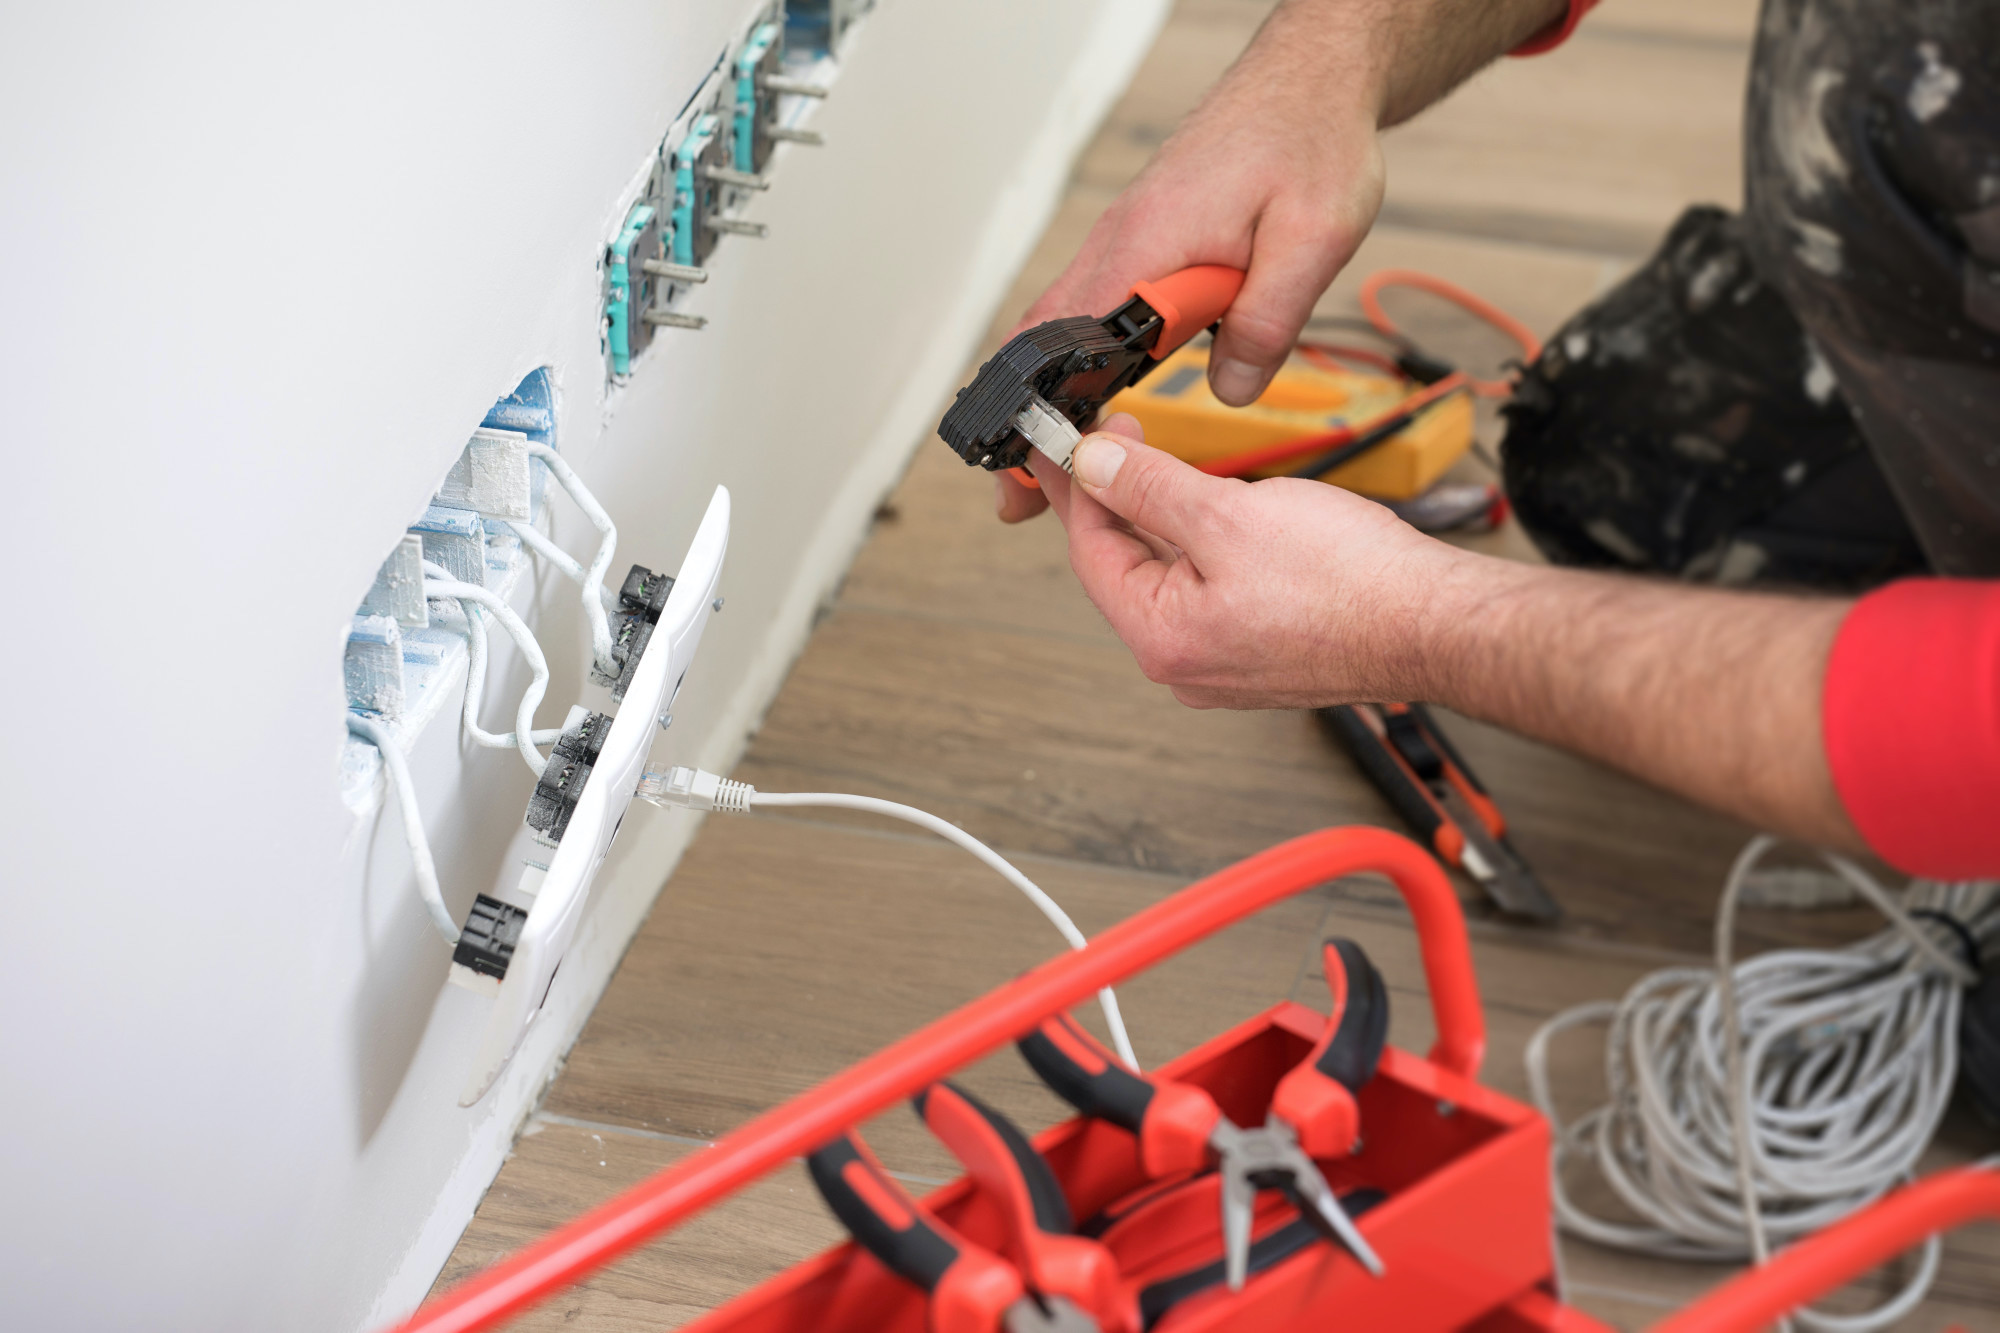 If you are going through a home renovation, you might need house rewiring. Learn why you should hire an electrician in this guide.